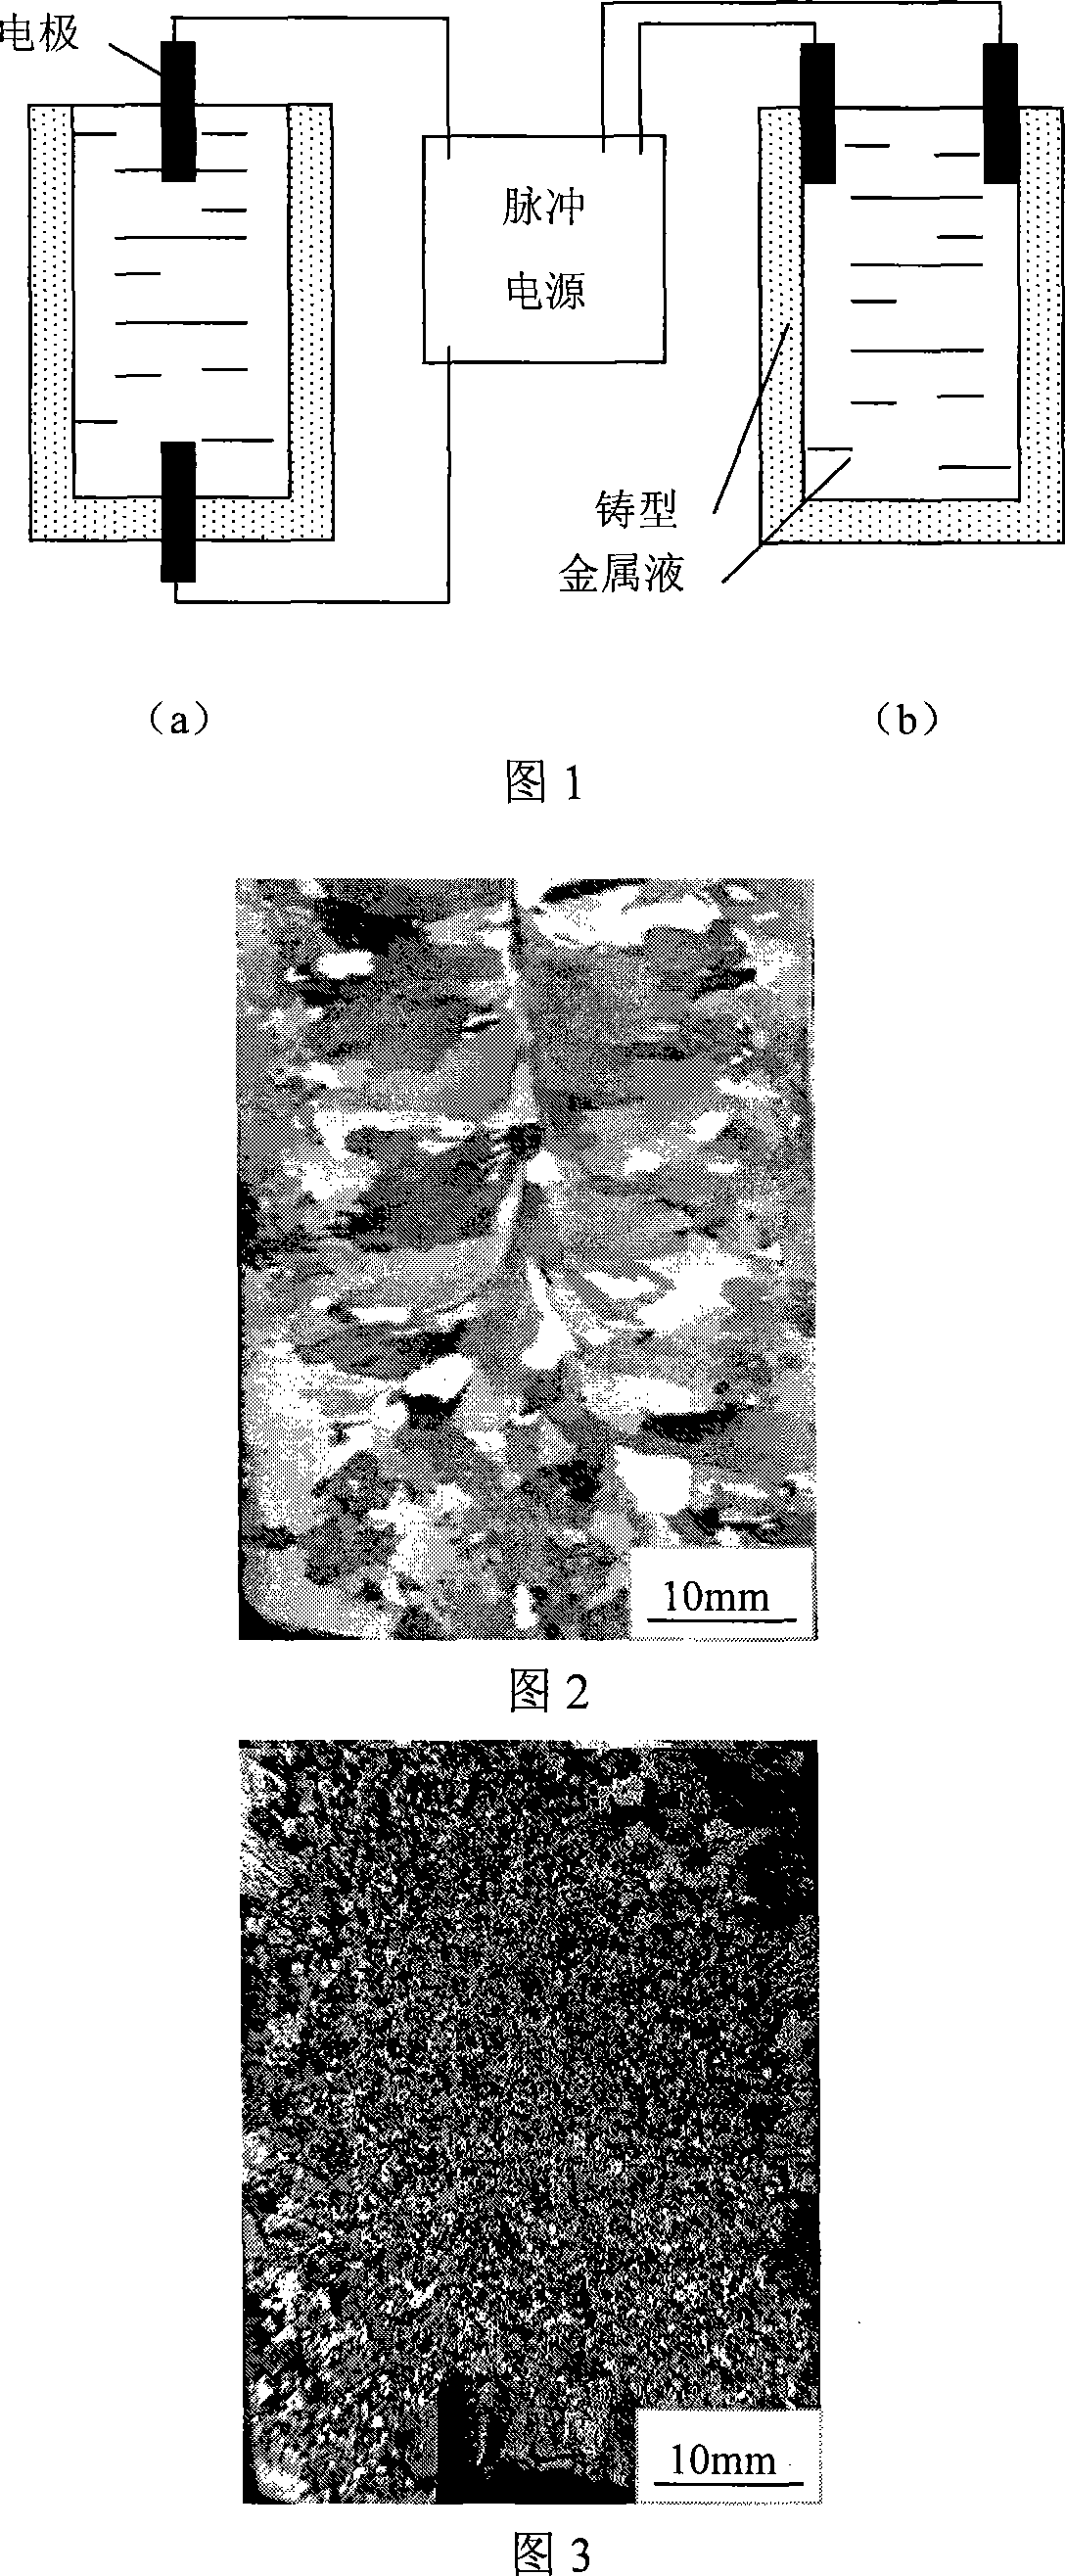 Method for solidifying microlite by impulse current liquid surface disturbance